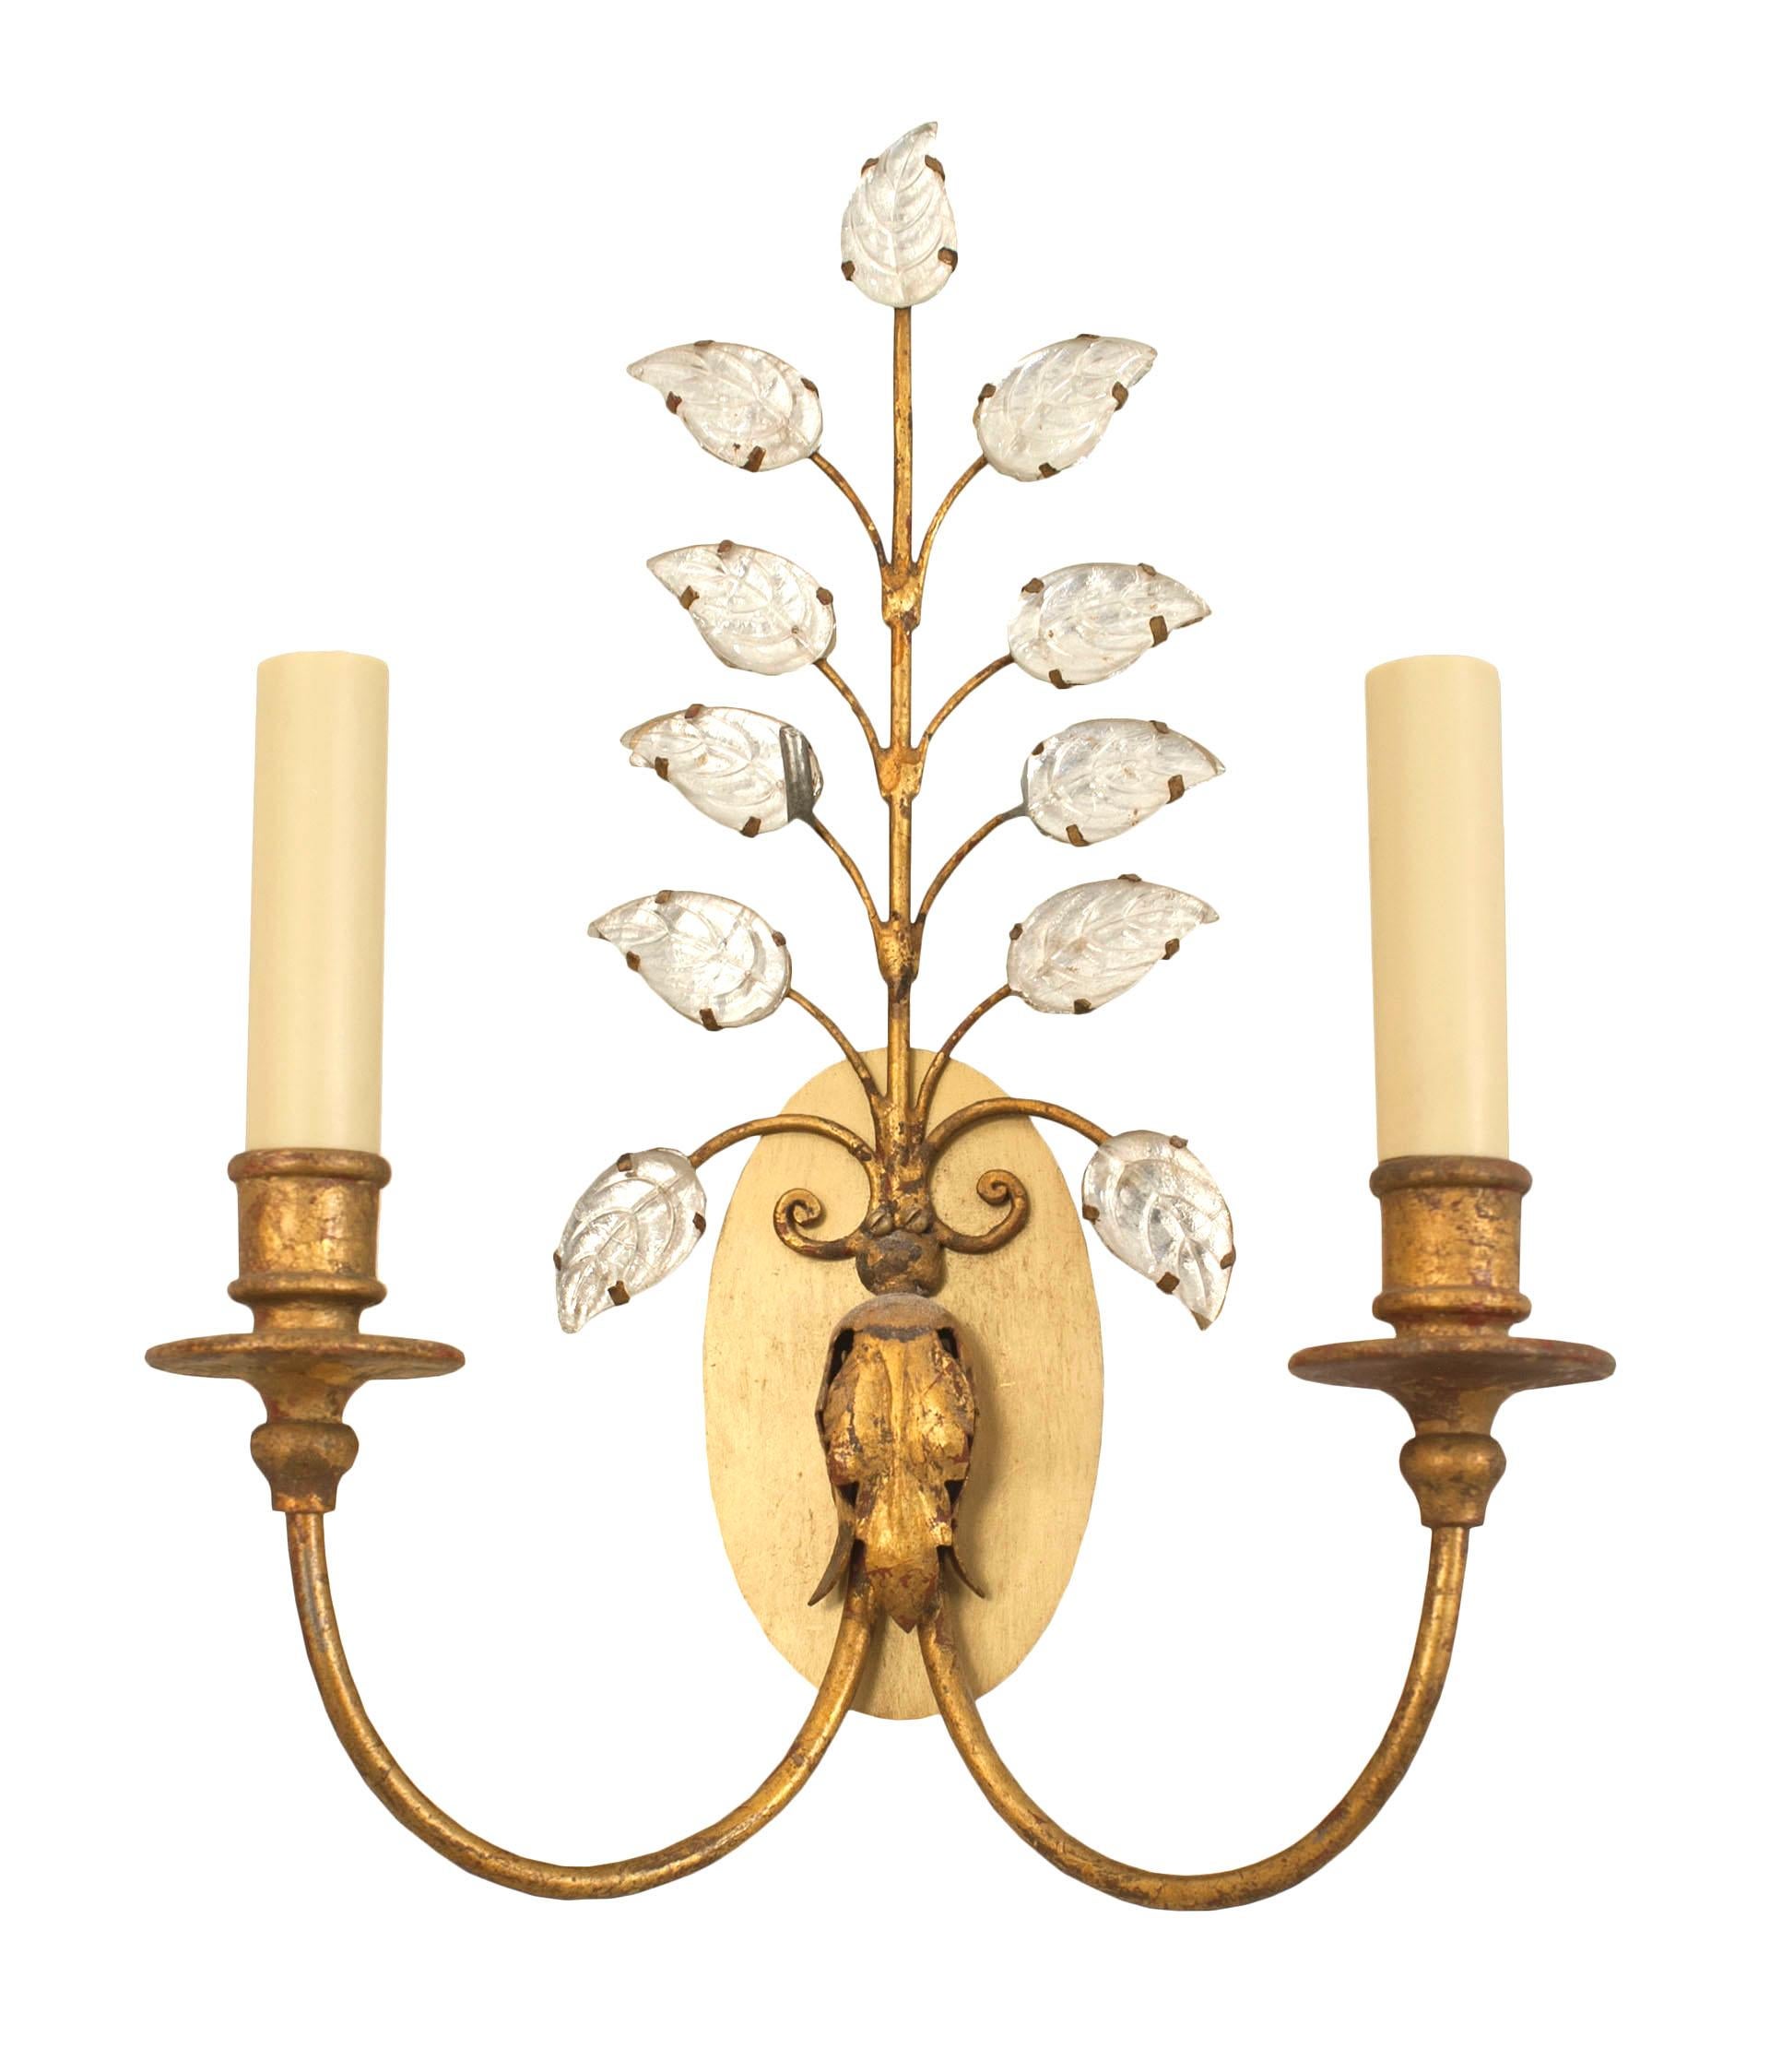 Pair of French 1940s gilt metal two-arm wall sconces with silvered crystal tiered leaf design by Baguès.

Baguès was born in Auvergne around 1840 and became famous internationally as a creator of art lighting. In the beginning it specialized in